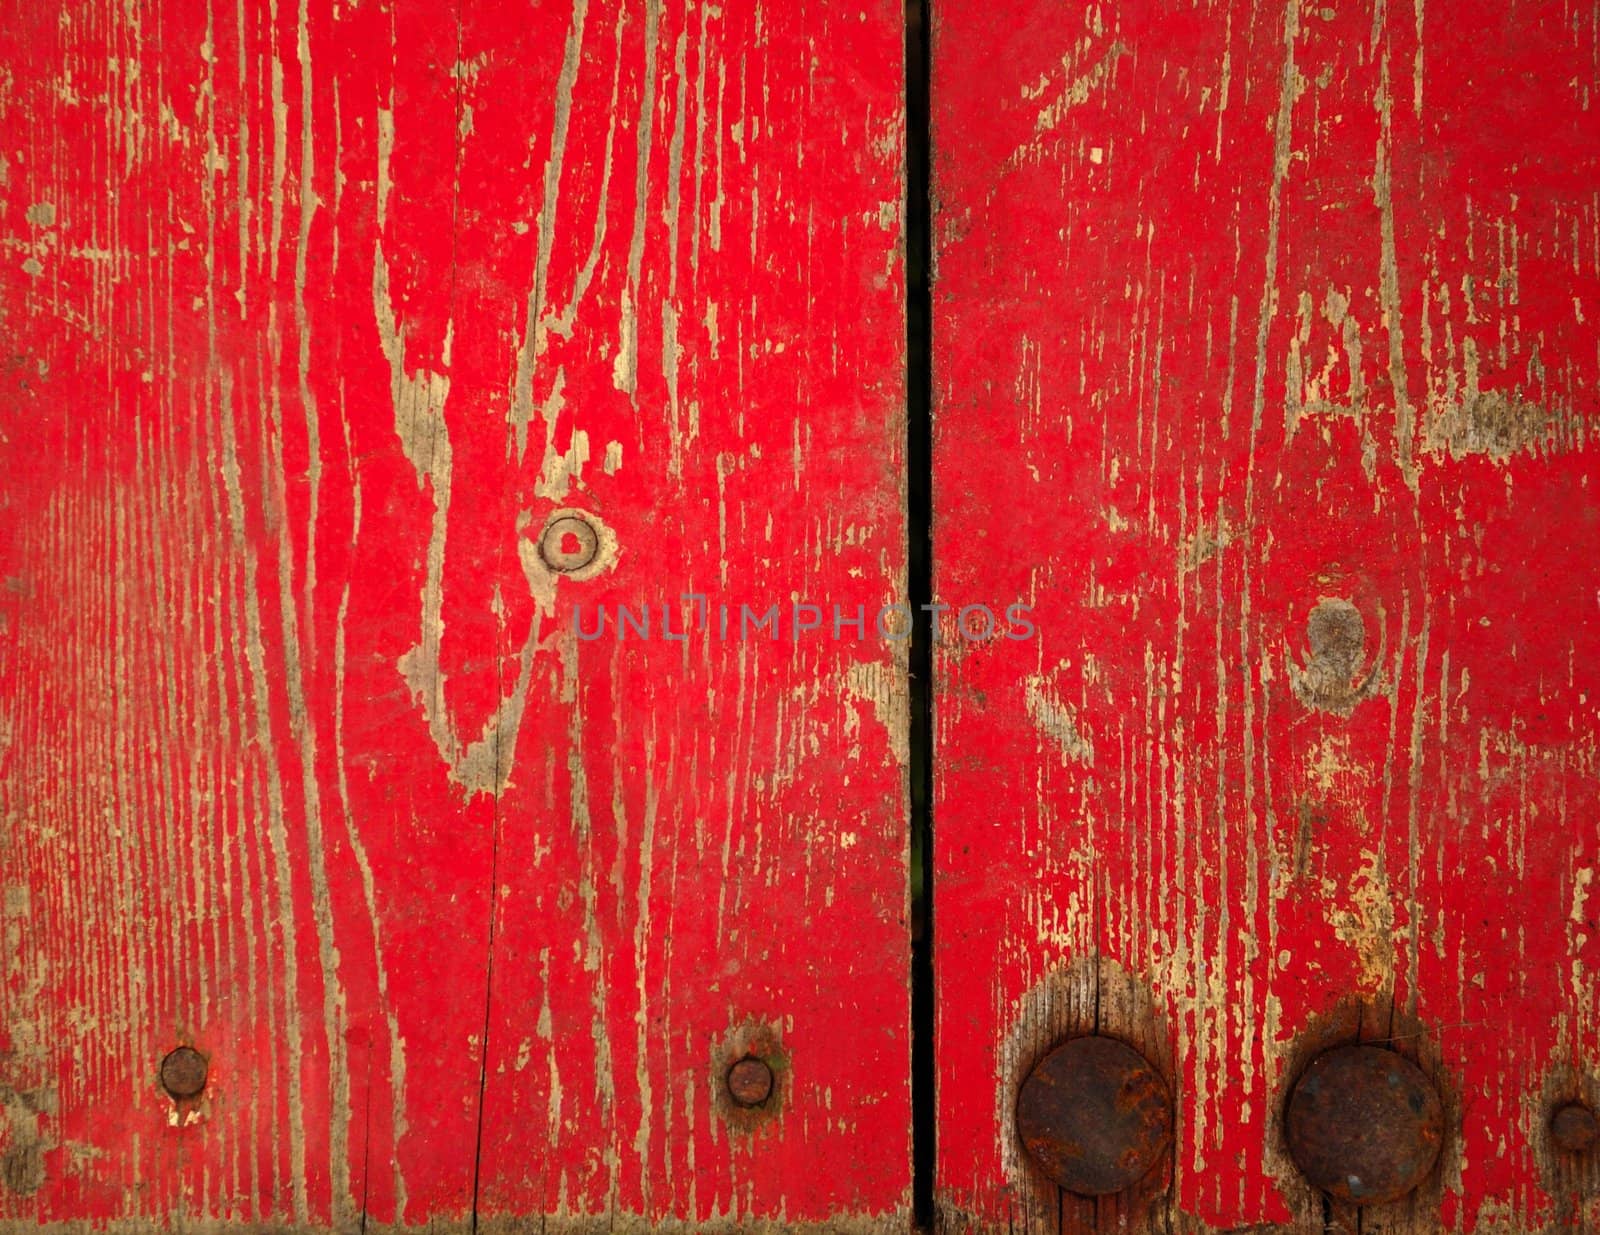 Wood with chipped red paint. Grunge style background